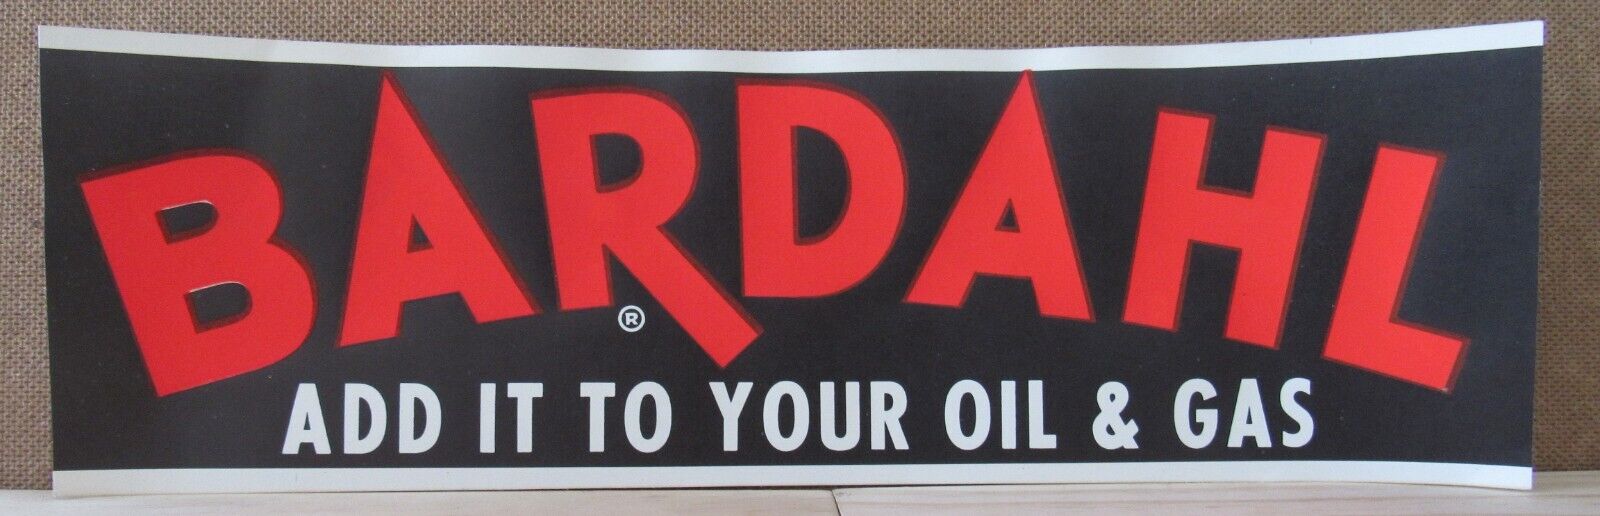 UNUSED Vintage BARDAHL ADD IT TO YOUR OIL Window Sign Banner